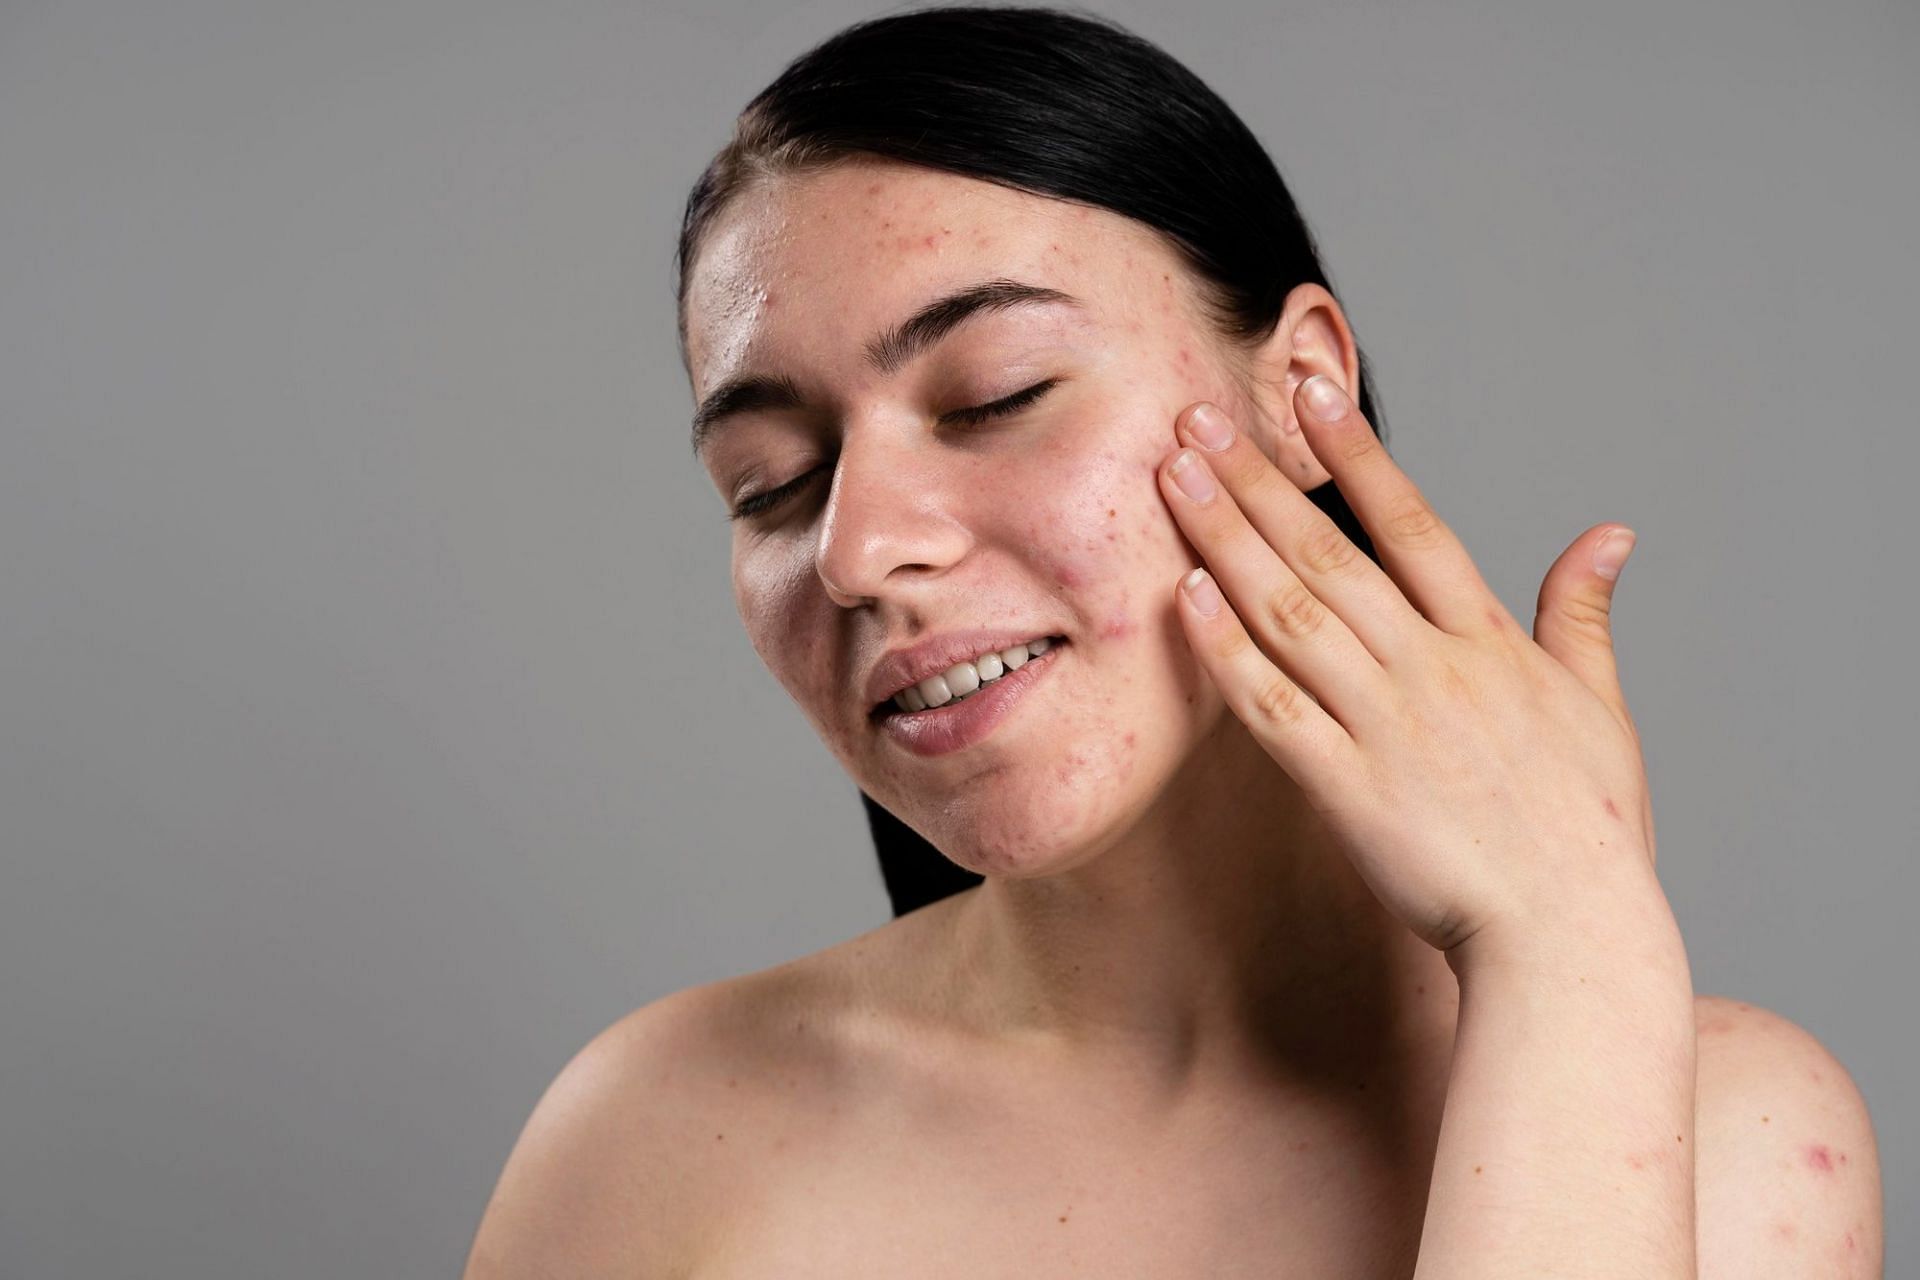 Get rid of oily skin with these best soaps for oily skin (Image by Freepik)